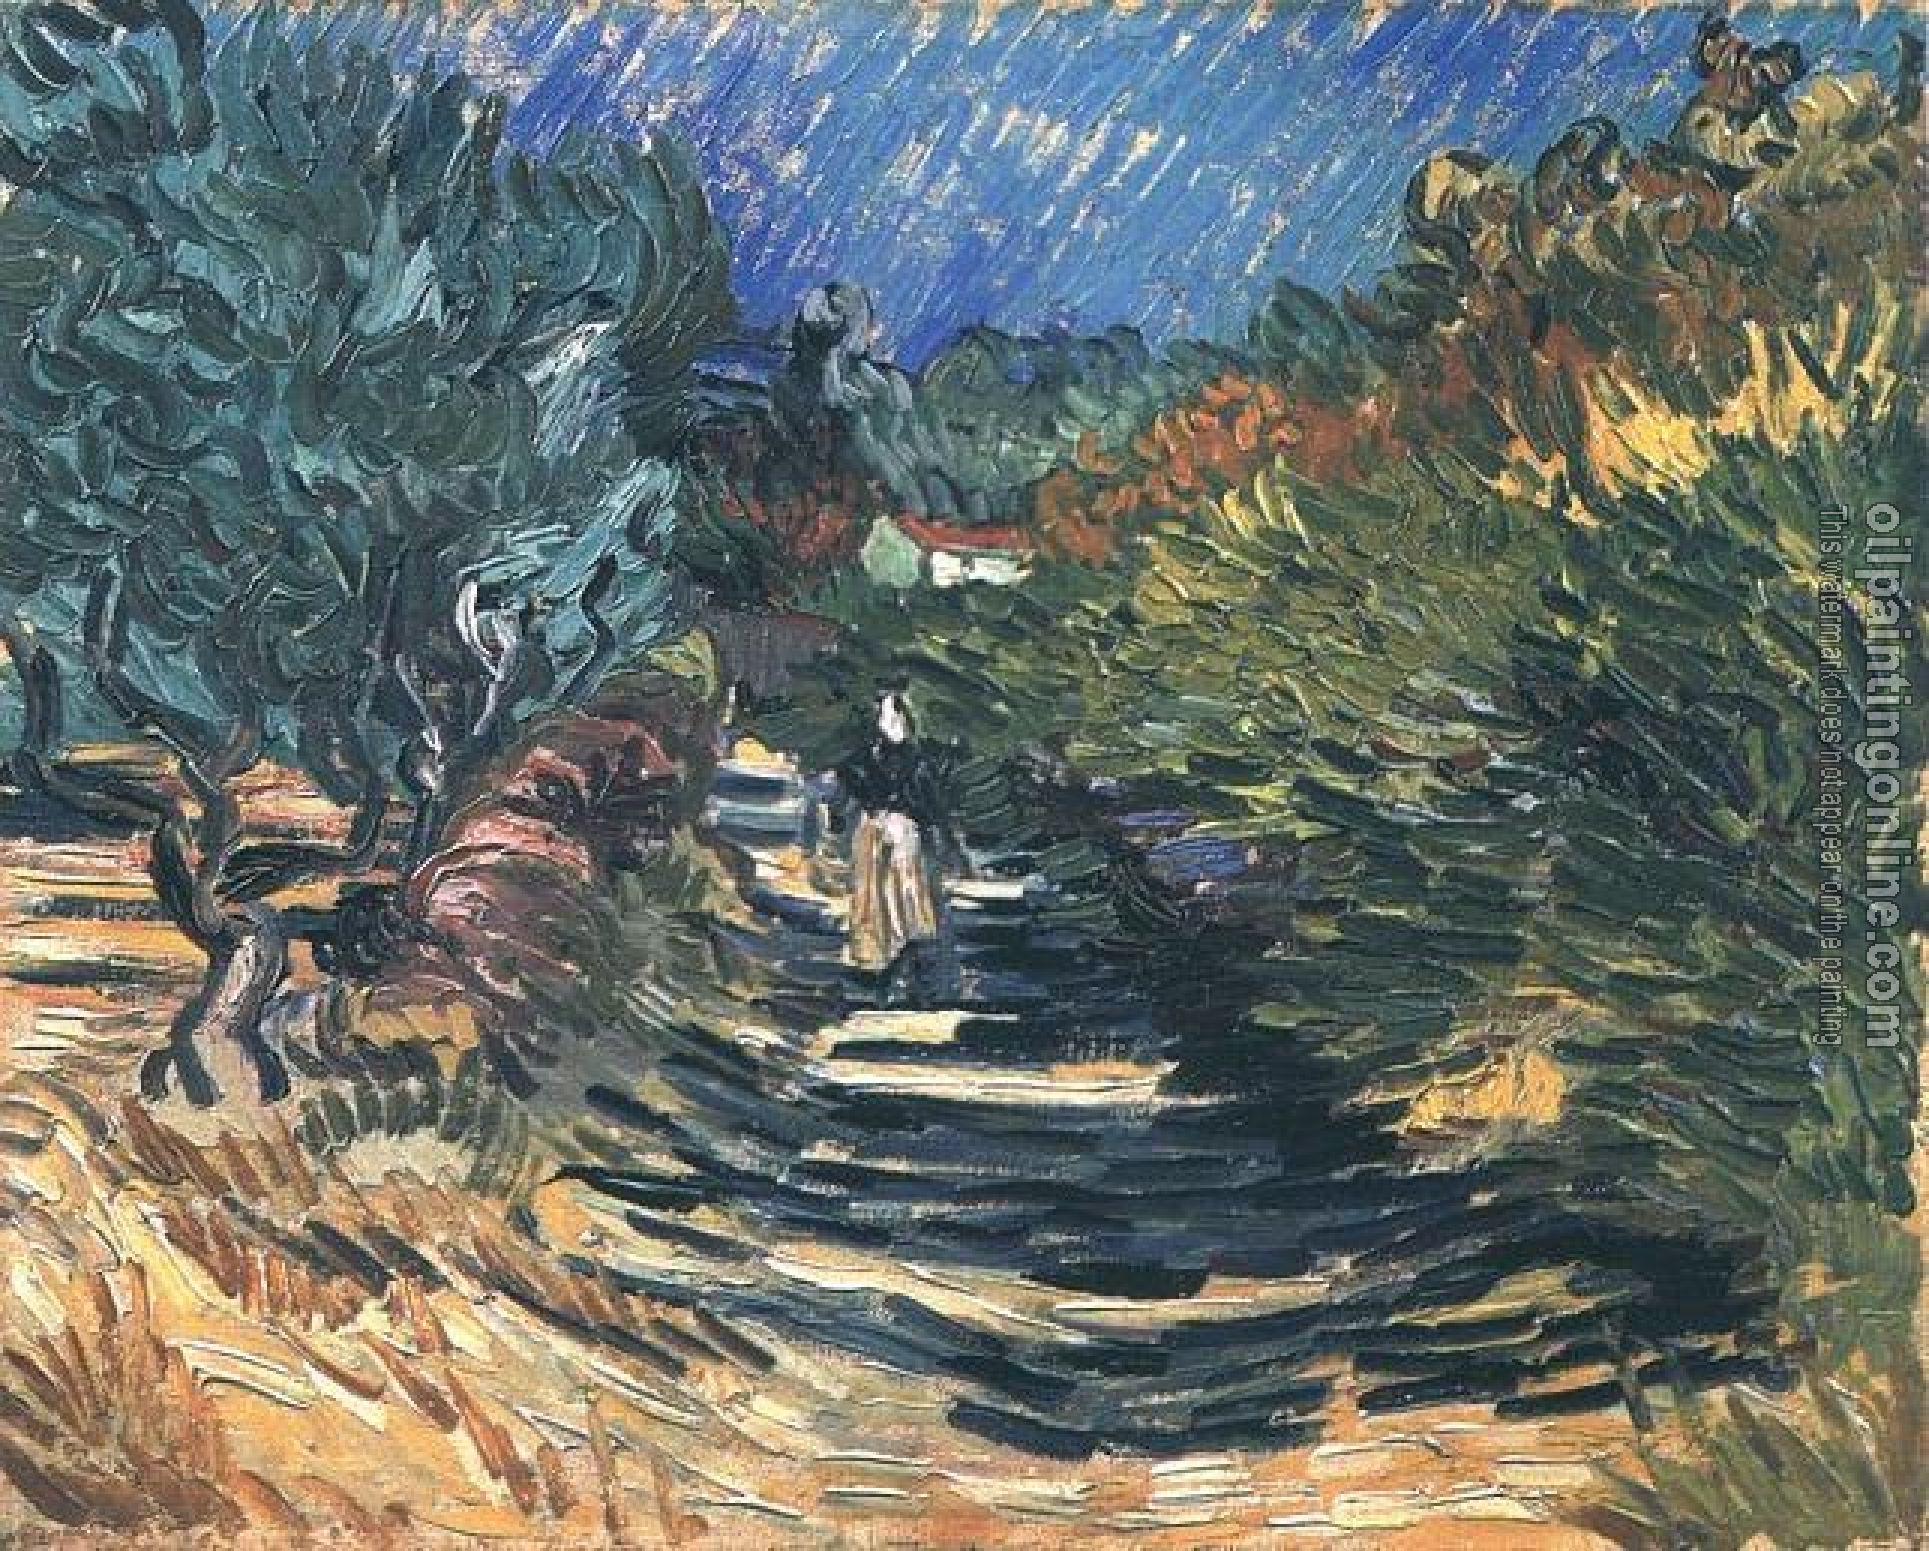 Gogh, Vincent van - A Road at Saint-Remy with Female Figure